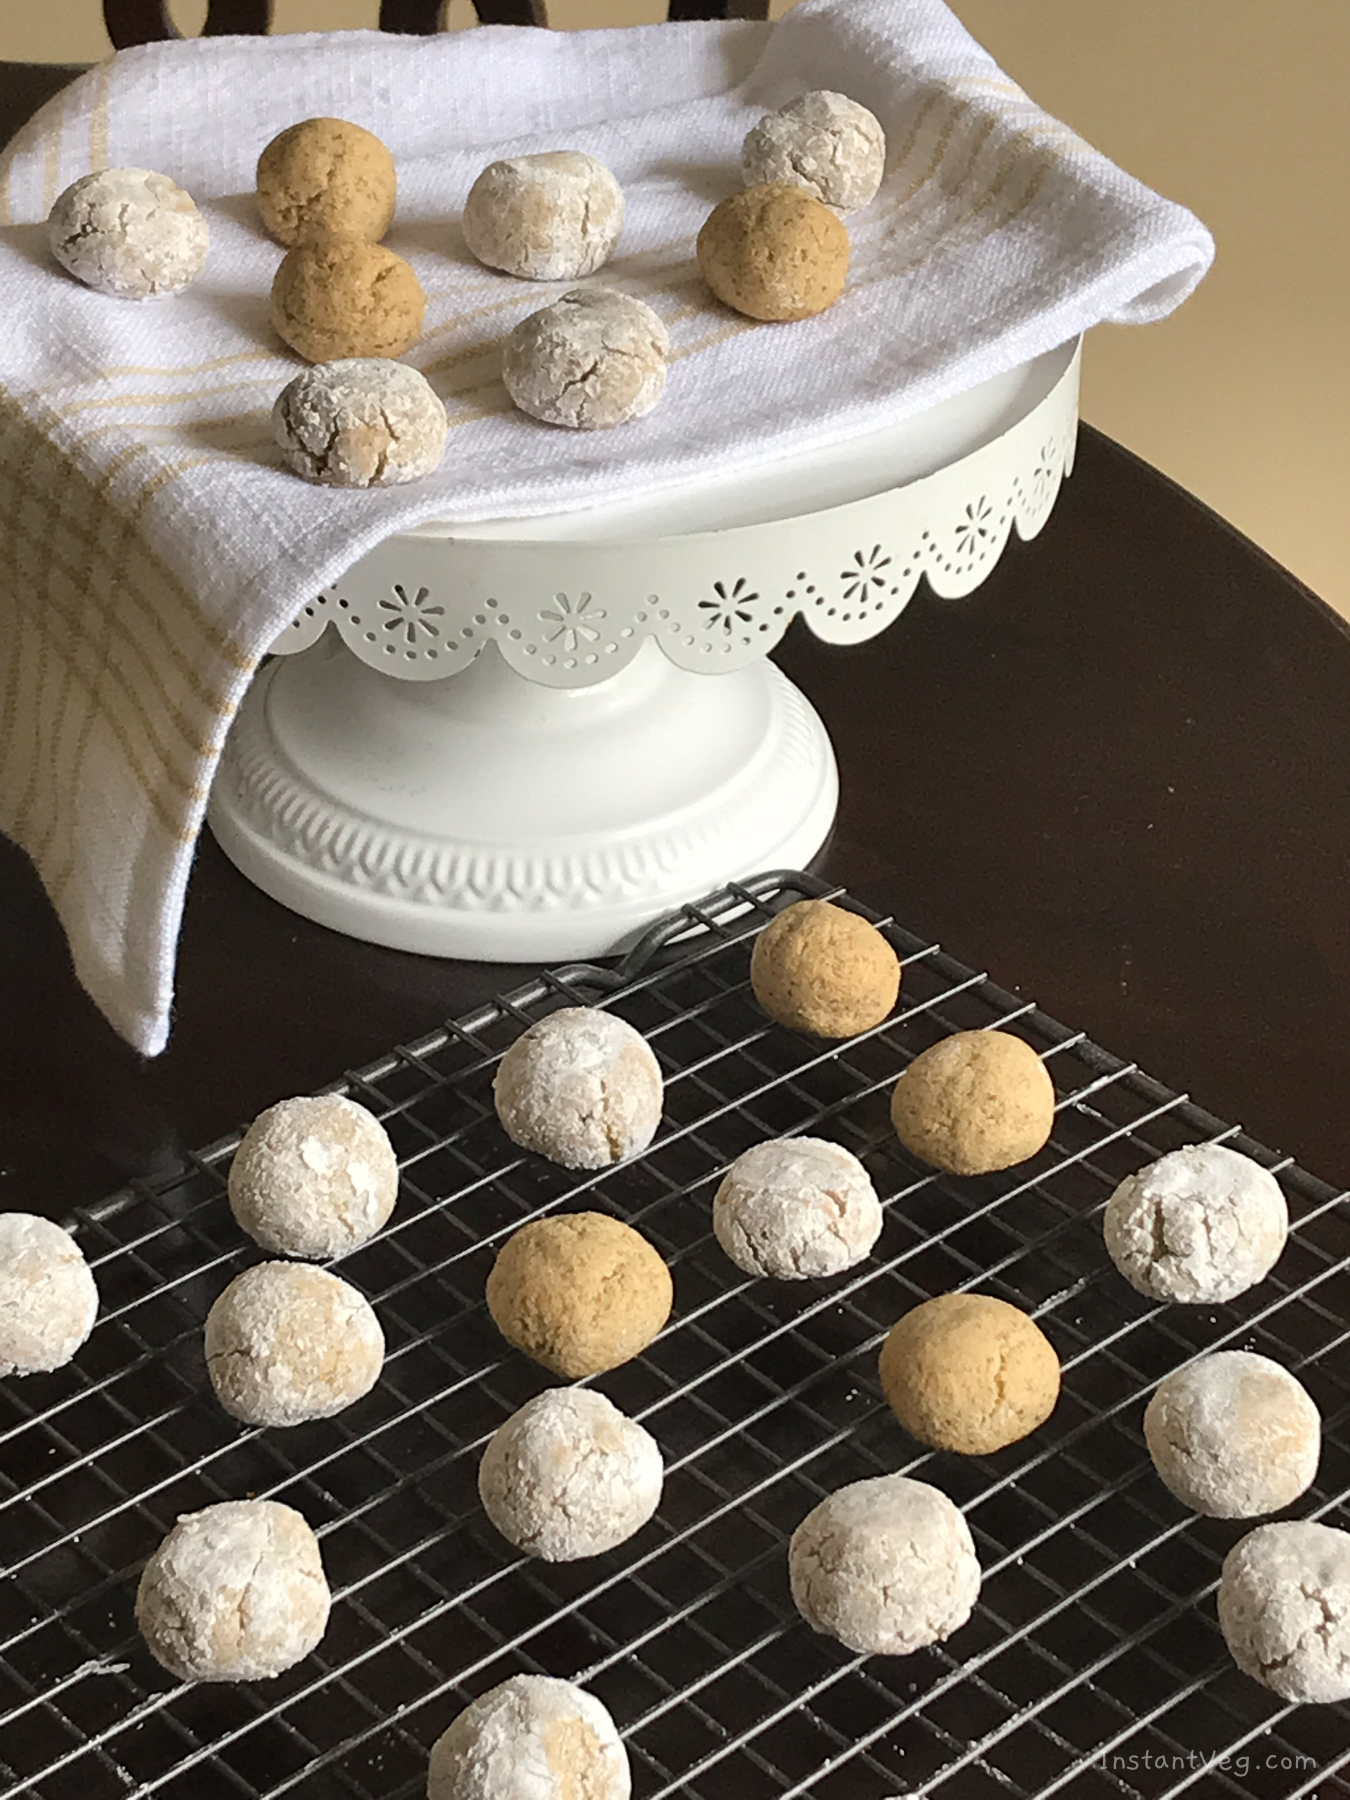 small white and golden round cookies on a baking sheet and on a towel-laden cake stand.